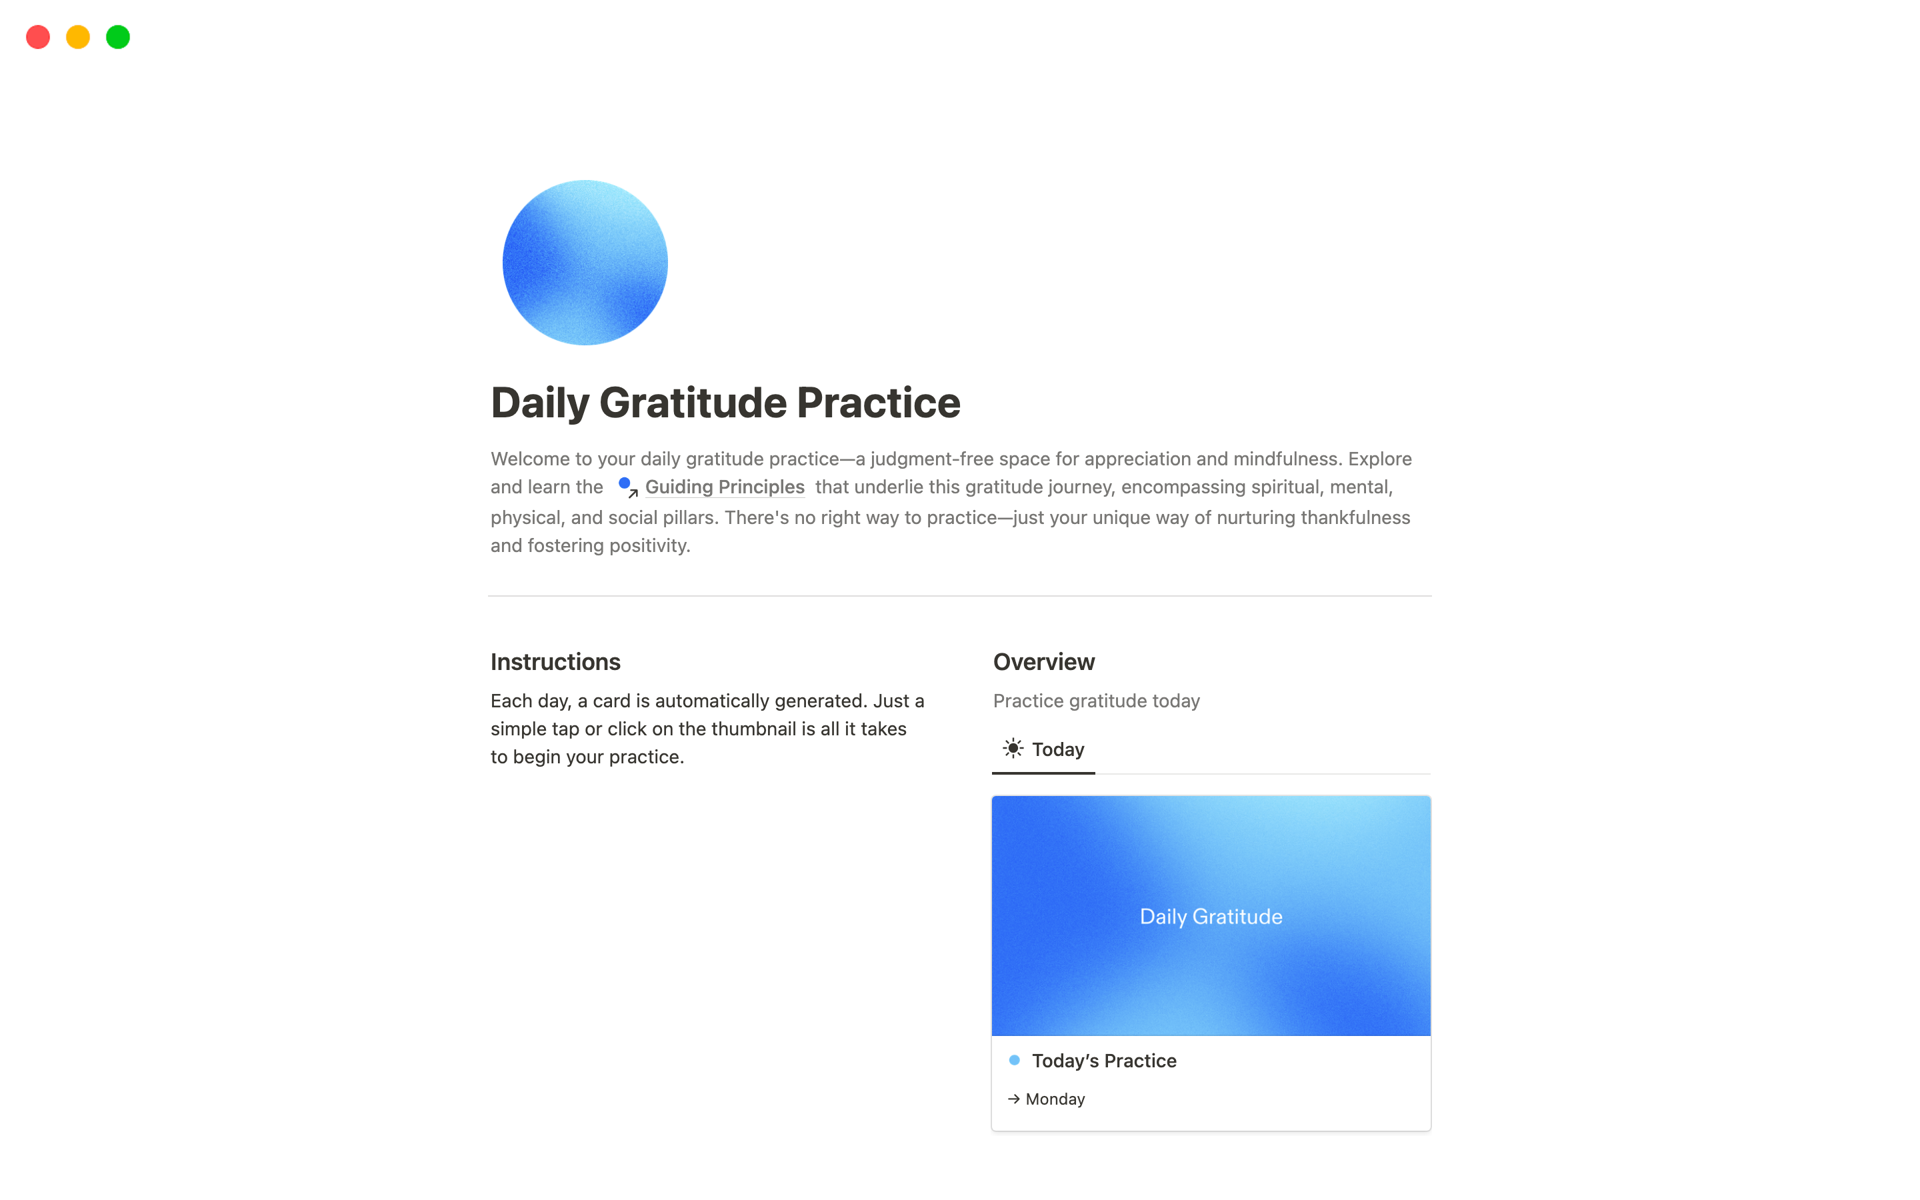 Your daily gratitude companion—effortless reflections, 
guiding principles, renewed practices.